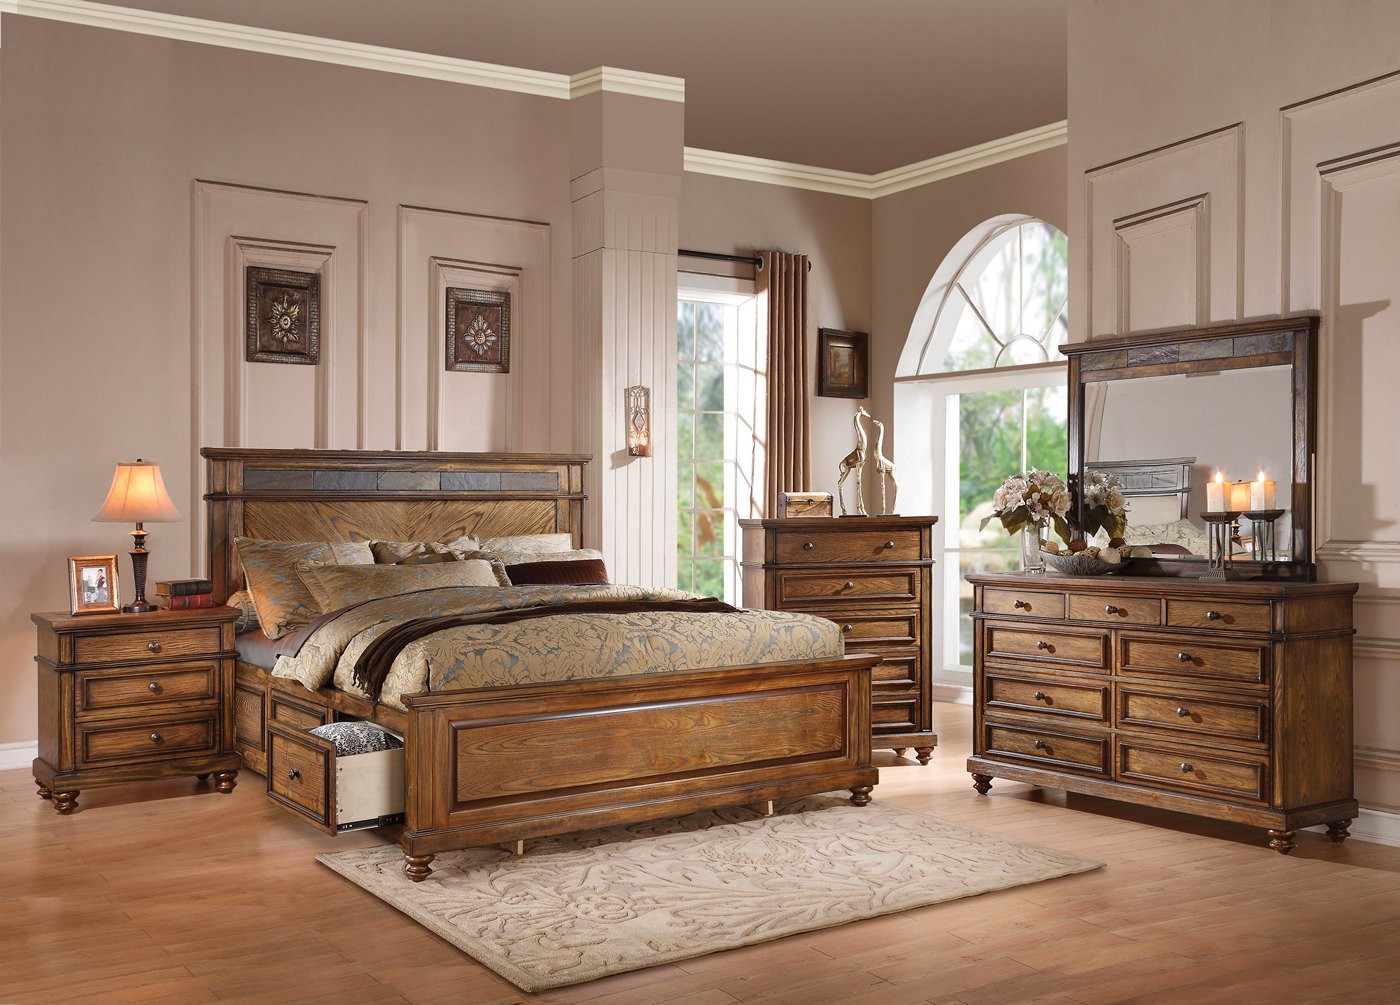 30 Antique Rustic King Bedroom Sets - Home, Decoration, Style and Art Ideas